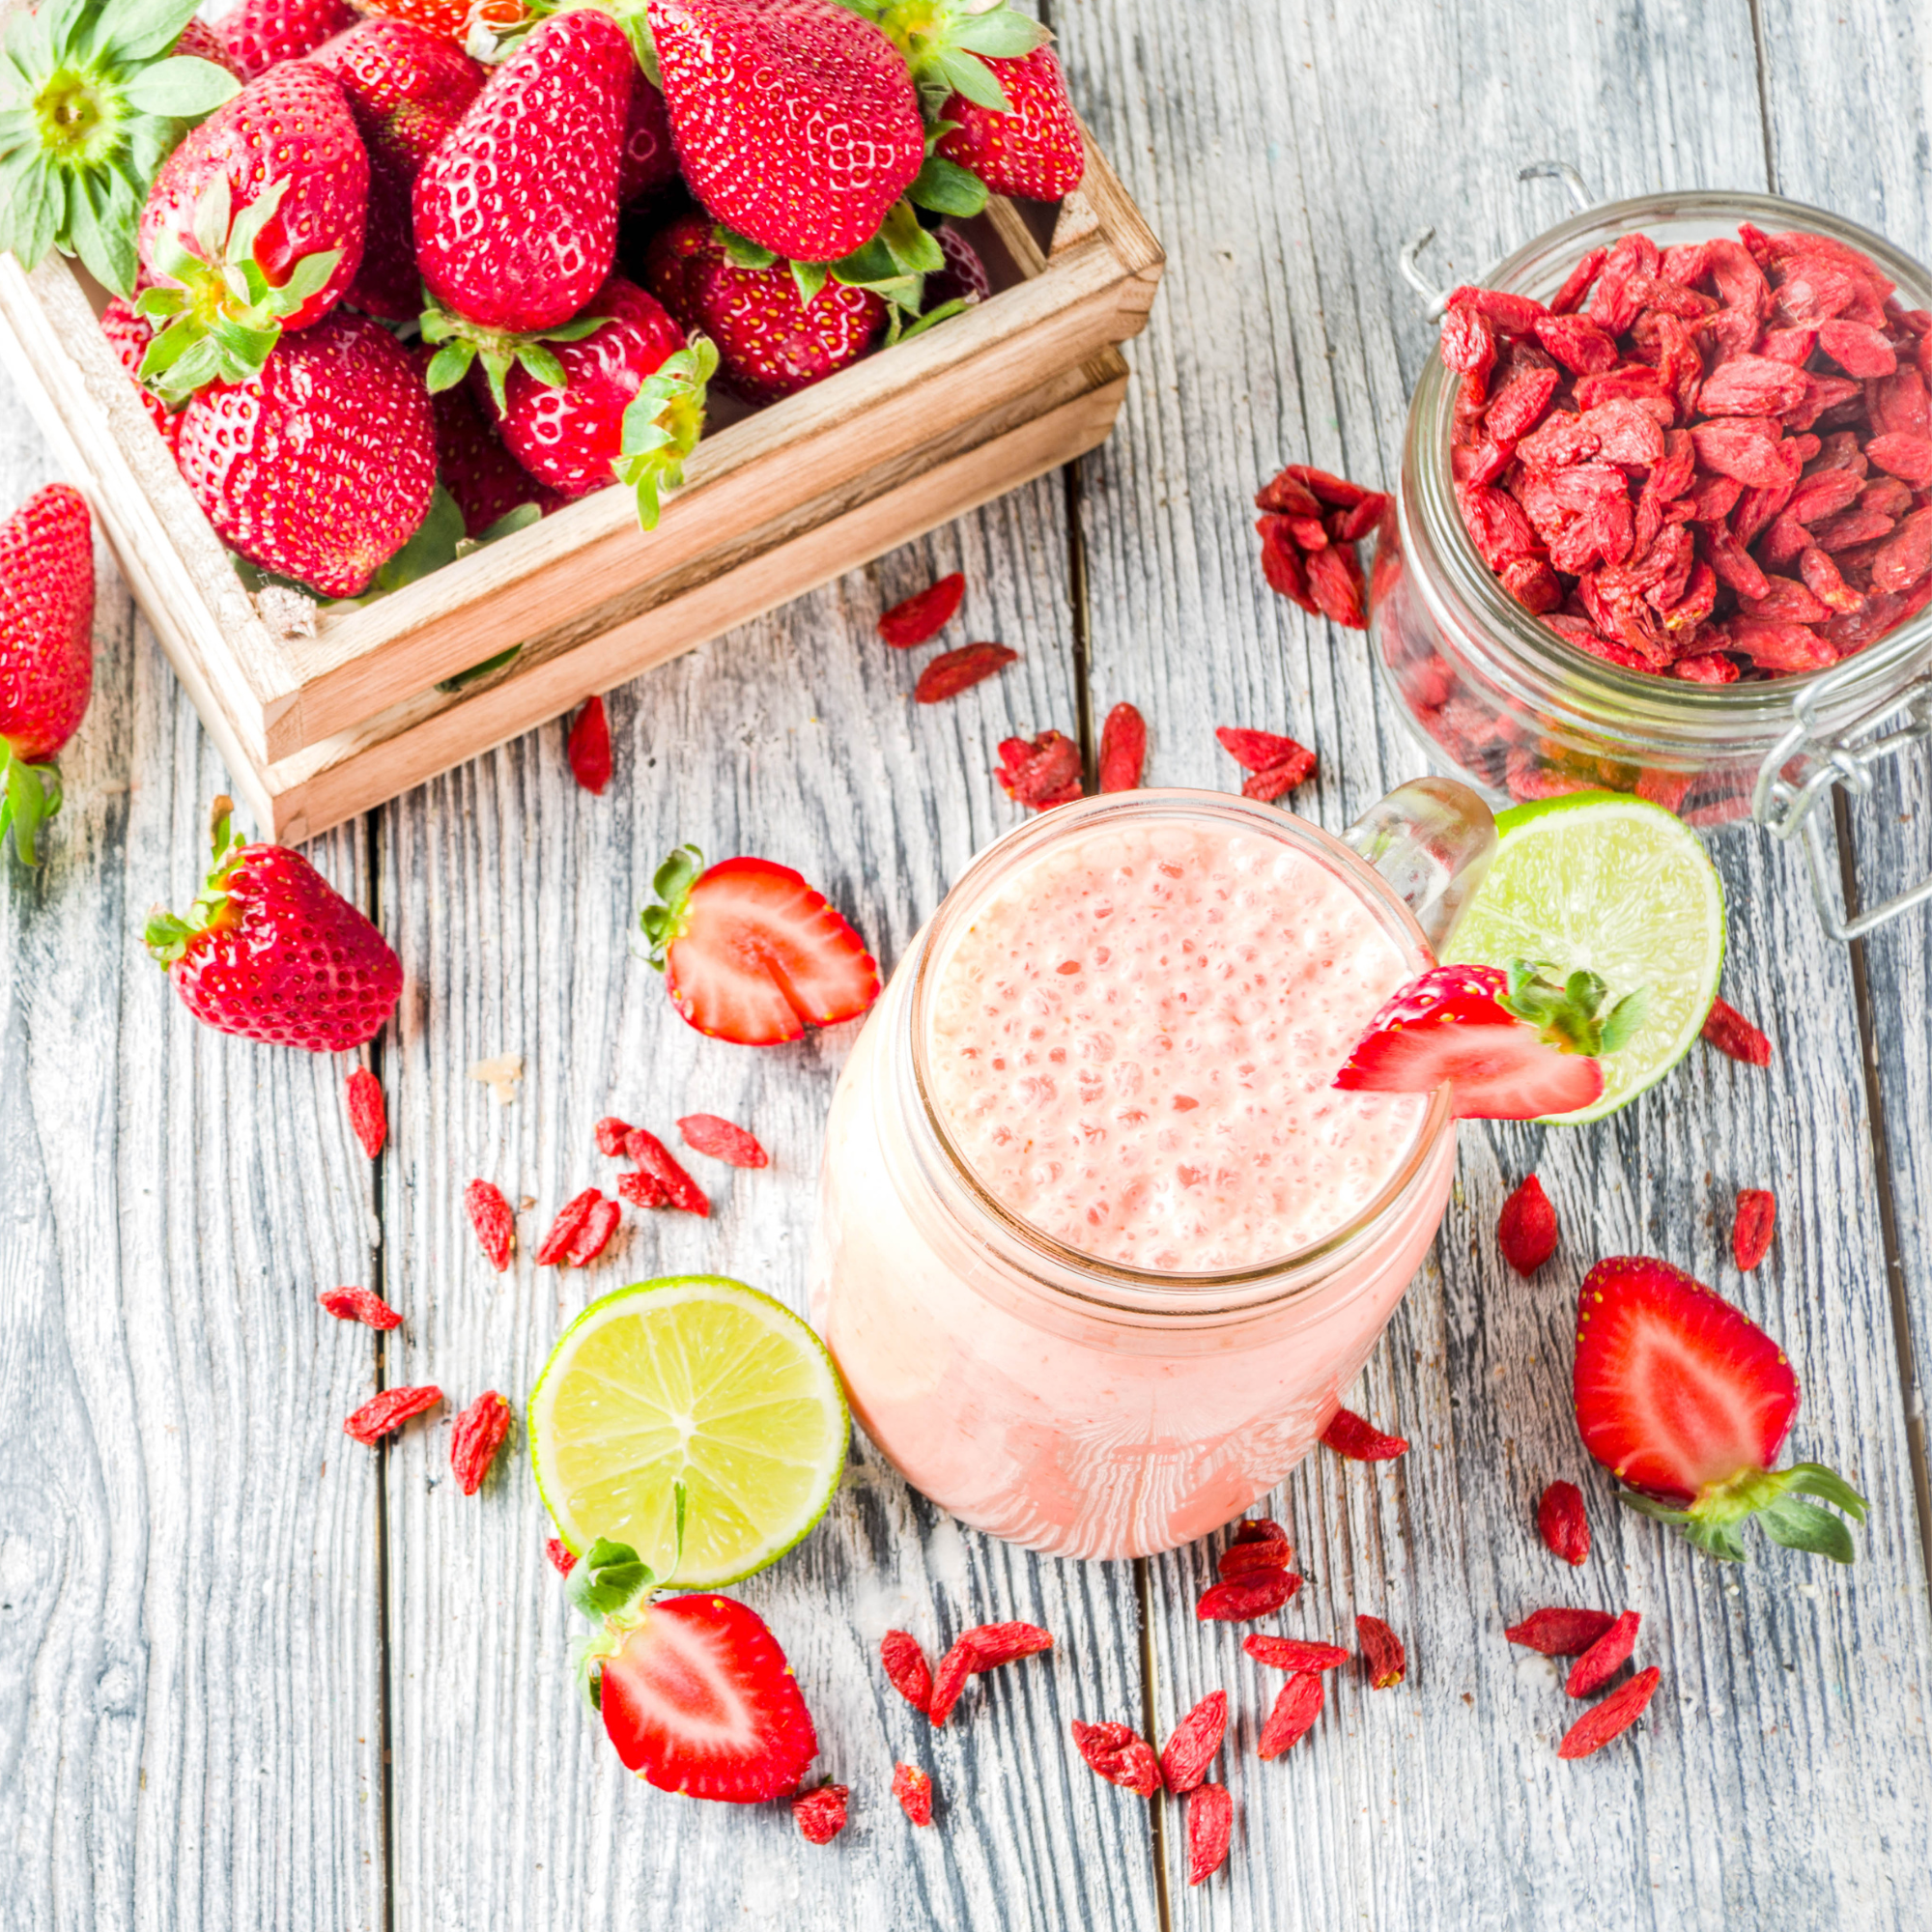 Pale smoothie with strawberries around it